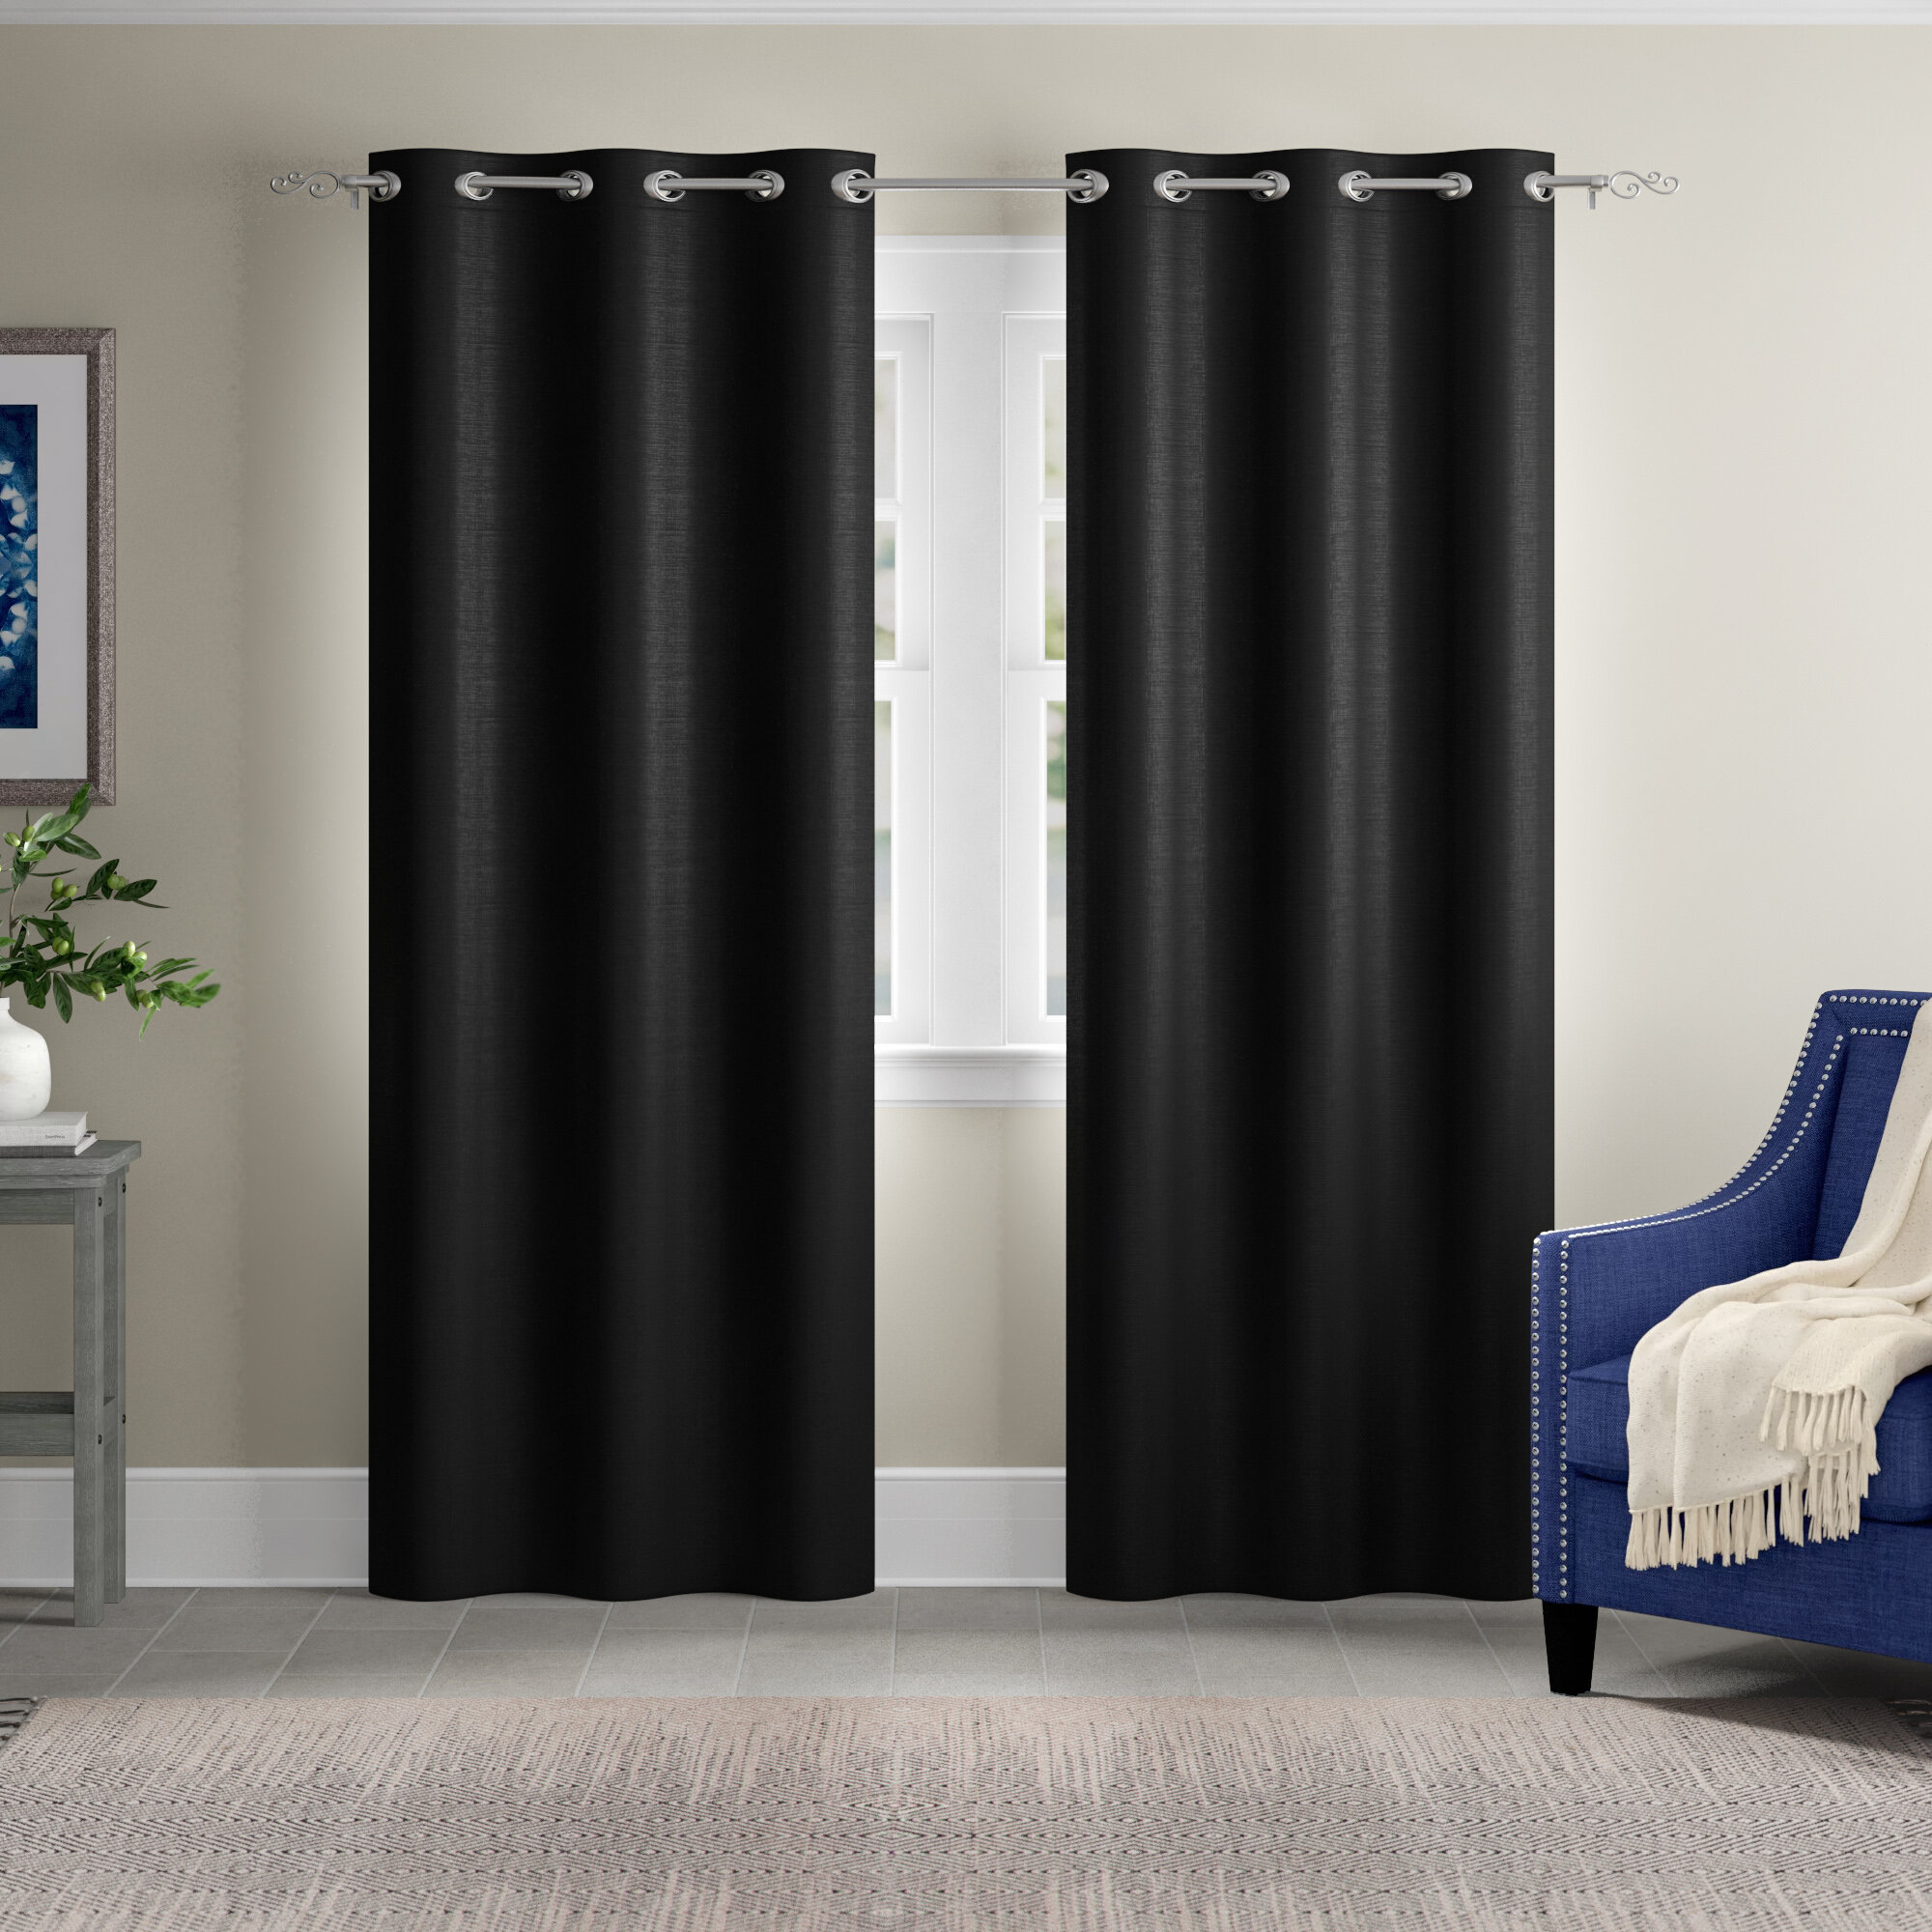 HILTON Window Treatment Thermal Insulated Grommet Blackout Curtains /Drapes PAIR 